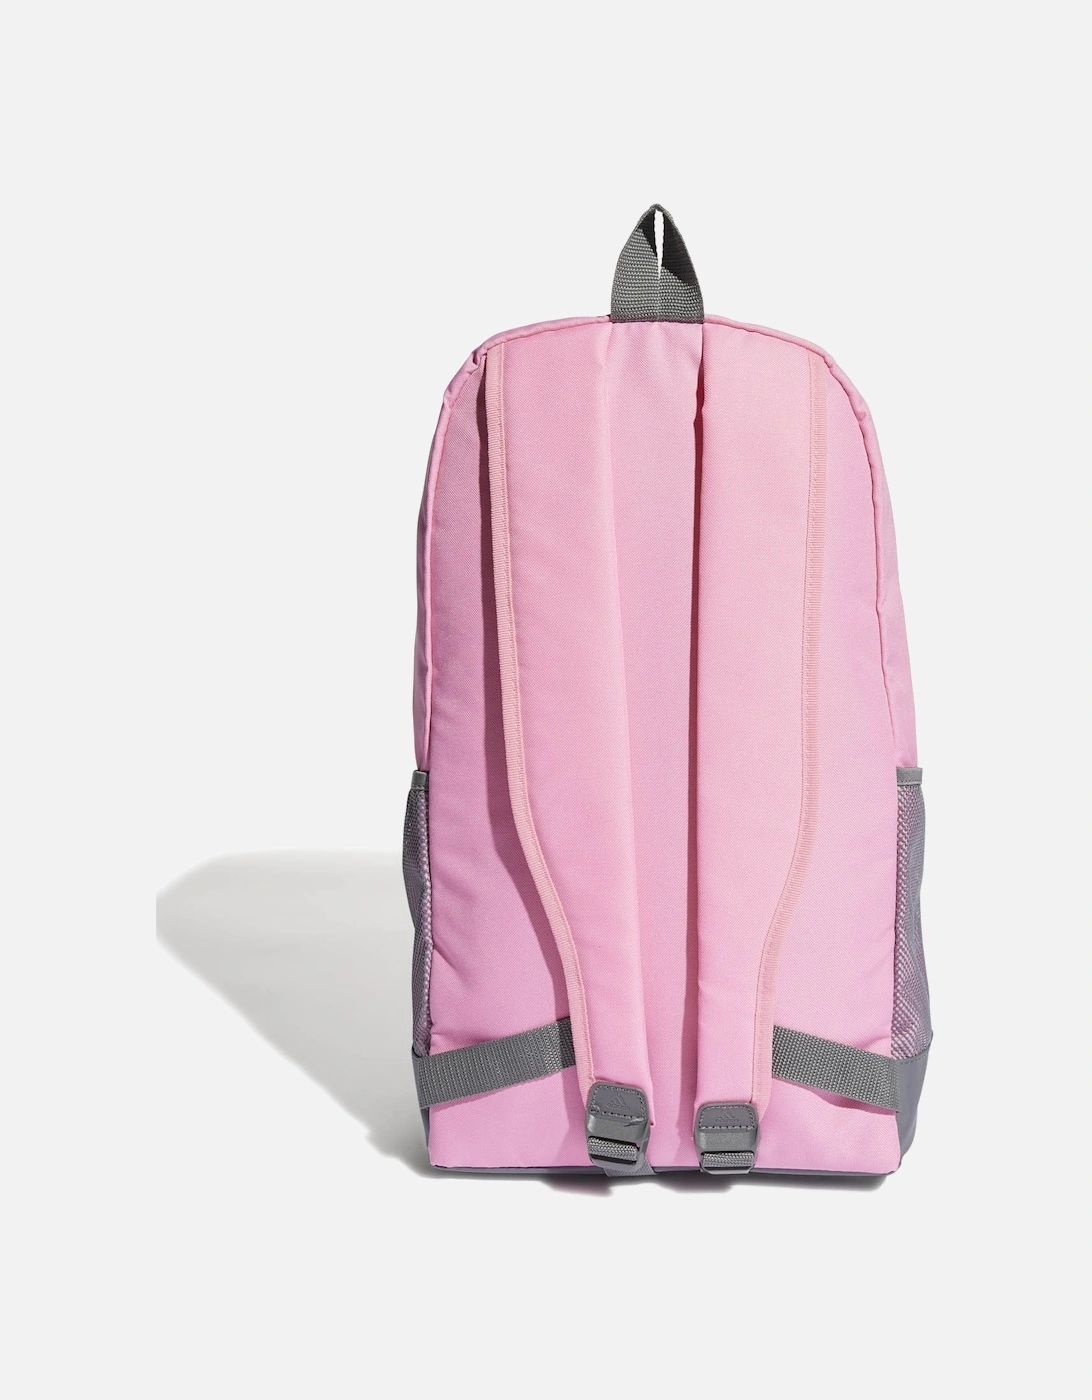 Linear Backpack (Pink/Grey)